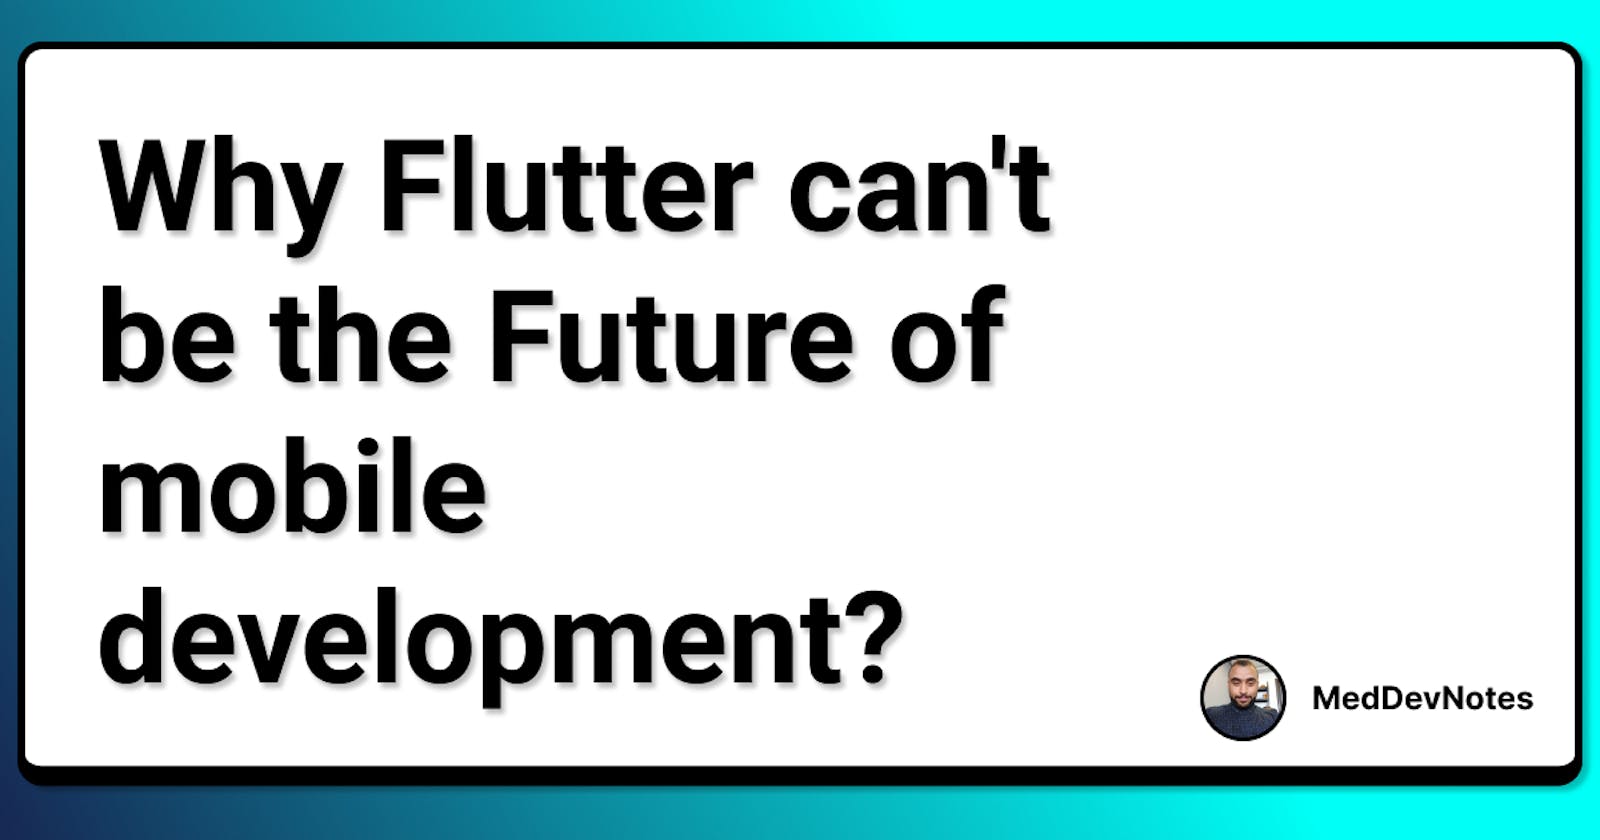 Why Flutter can't be the Future of mobile development?